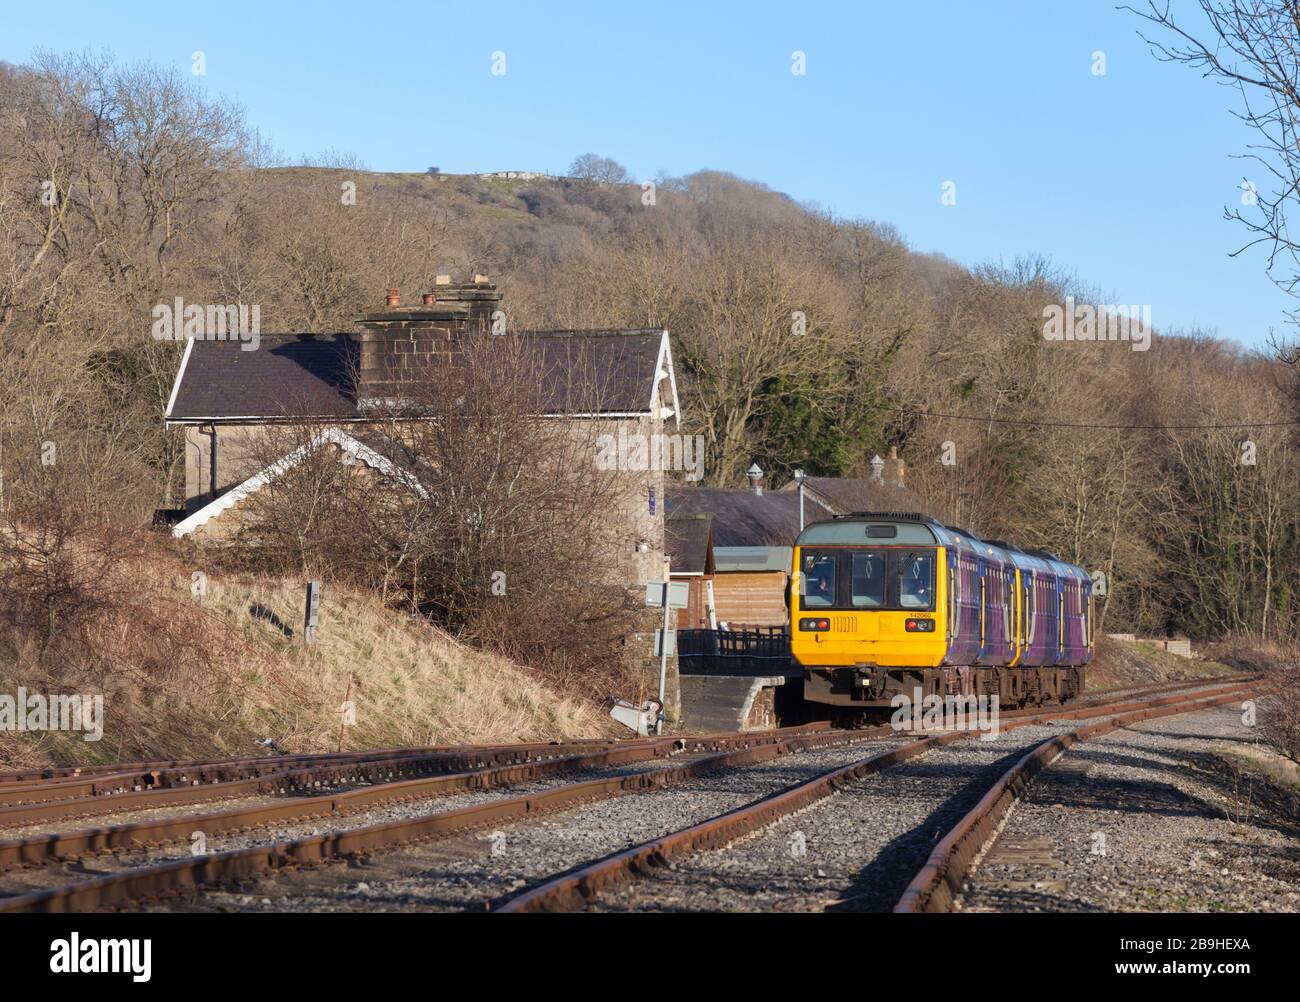 Former Northern Rail class 142 pacer trains 142060 + 142028 at Redmire, Wensleydale railway on their first day running in preservation Stock Photo